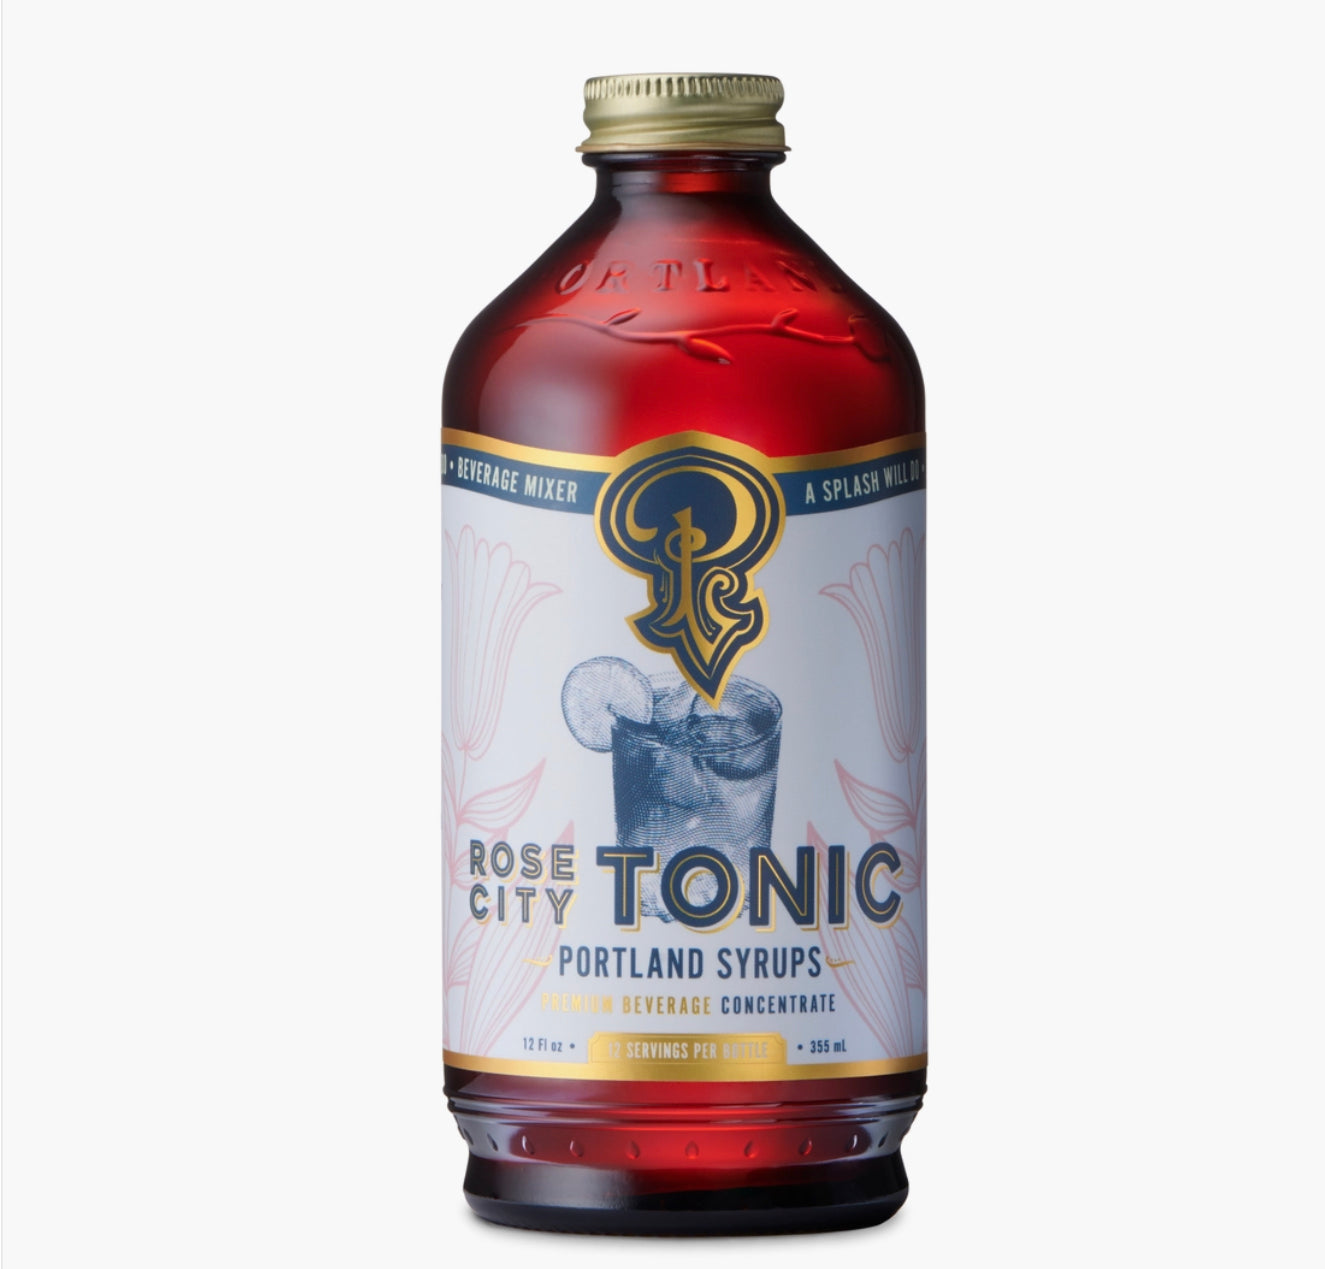 Rose City Tonic by Portland Syrups